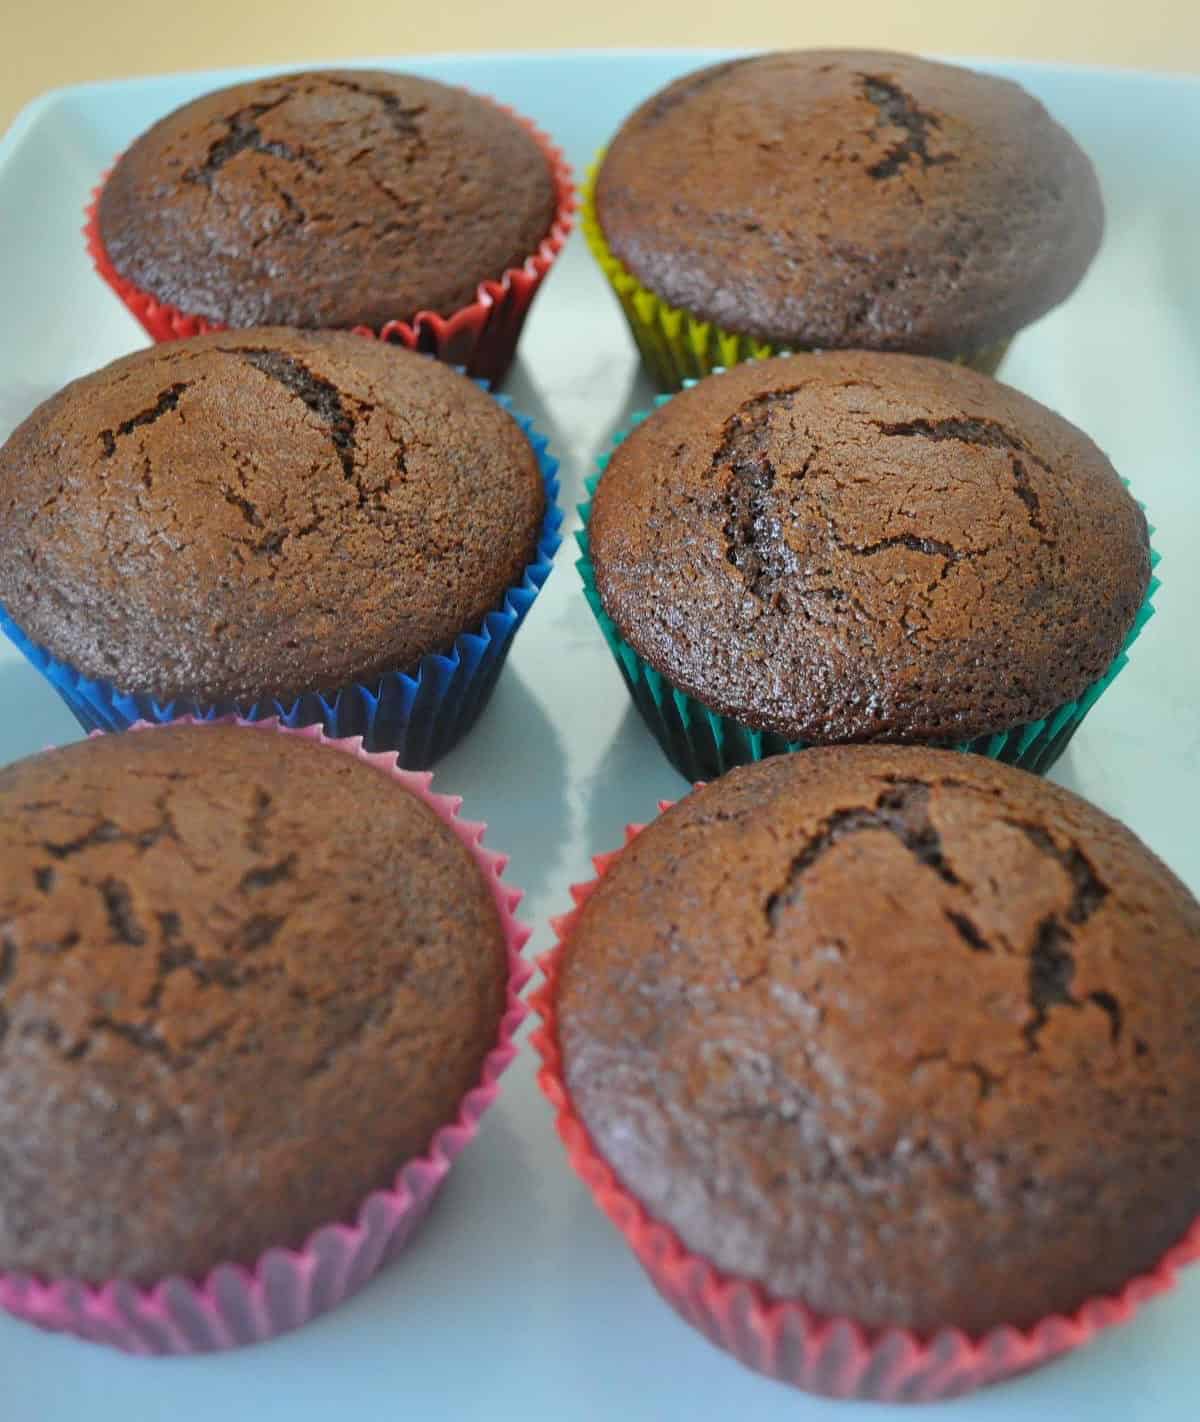  Chocolate and cola, two of the best things in life, combined in a cupcake!